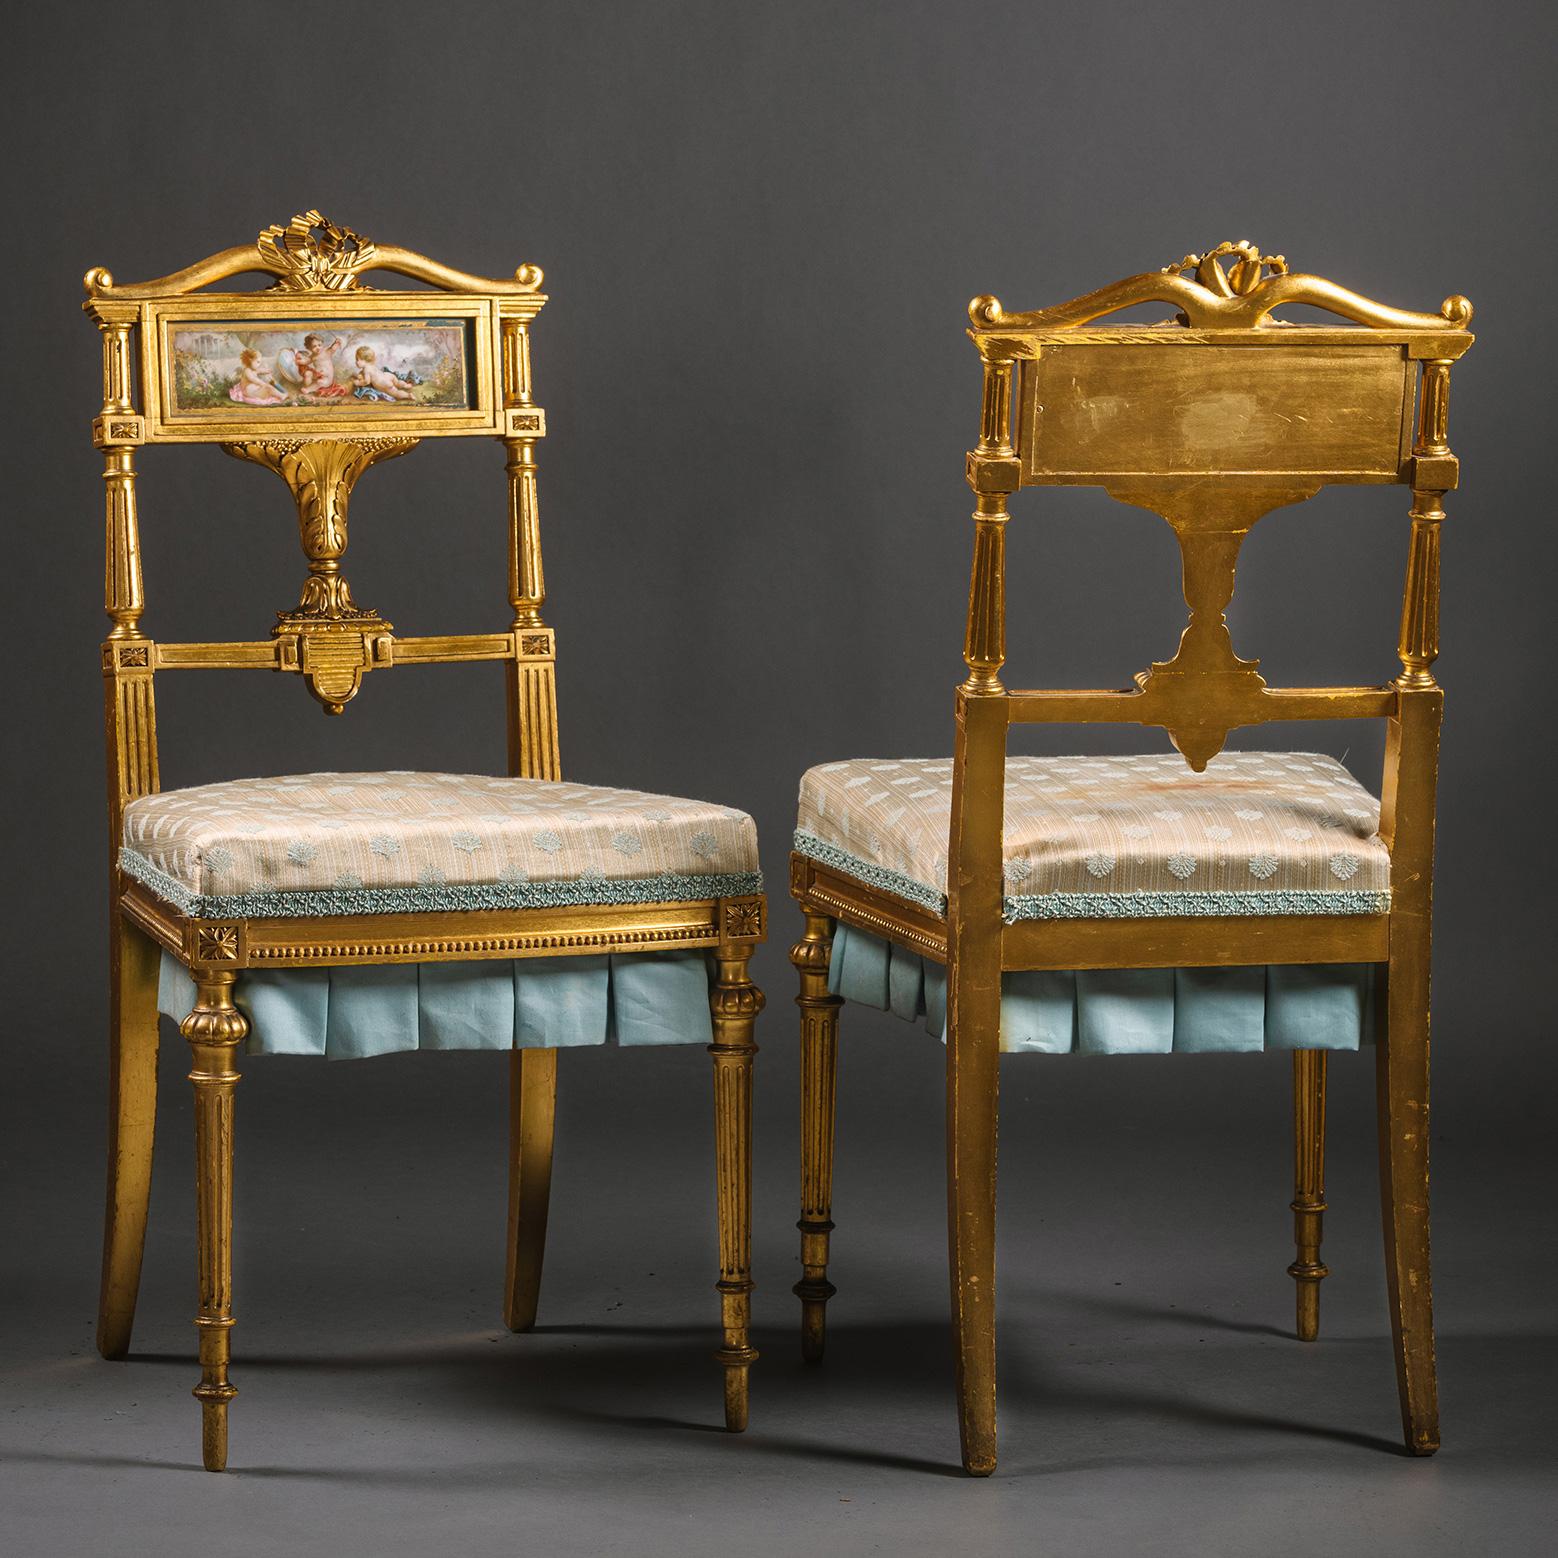 Pair of Louis XVI Style Giltwood and Sèvres-Style Porcelain Mounted Salon Chairs In Good Condition For Sale In Brighton, West Sussex